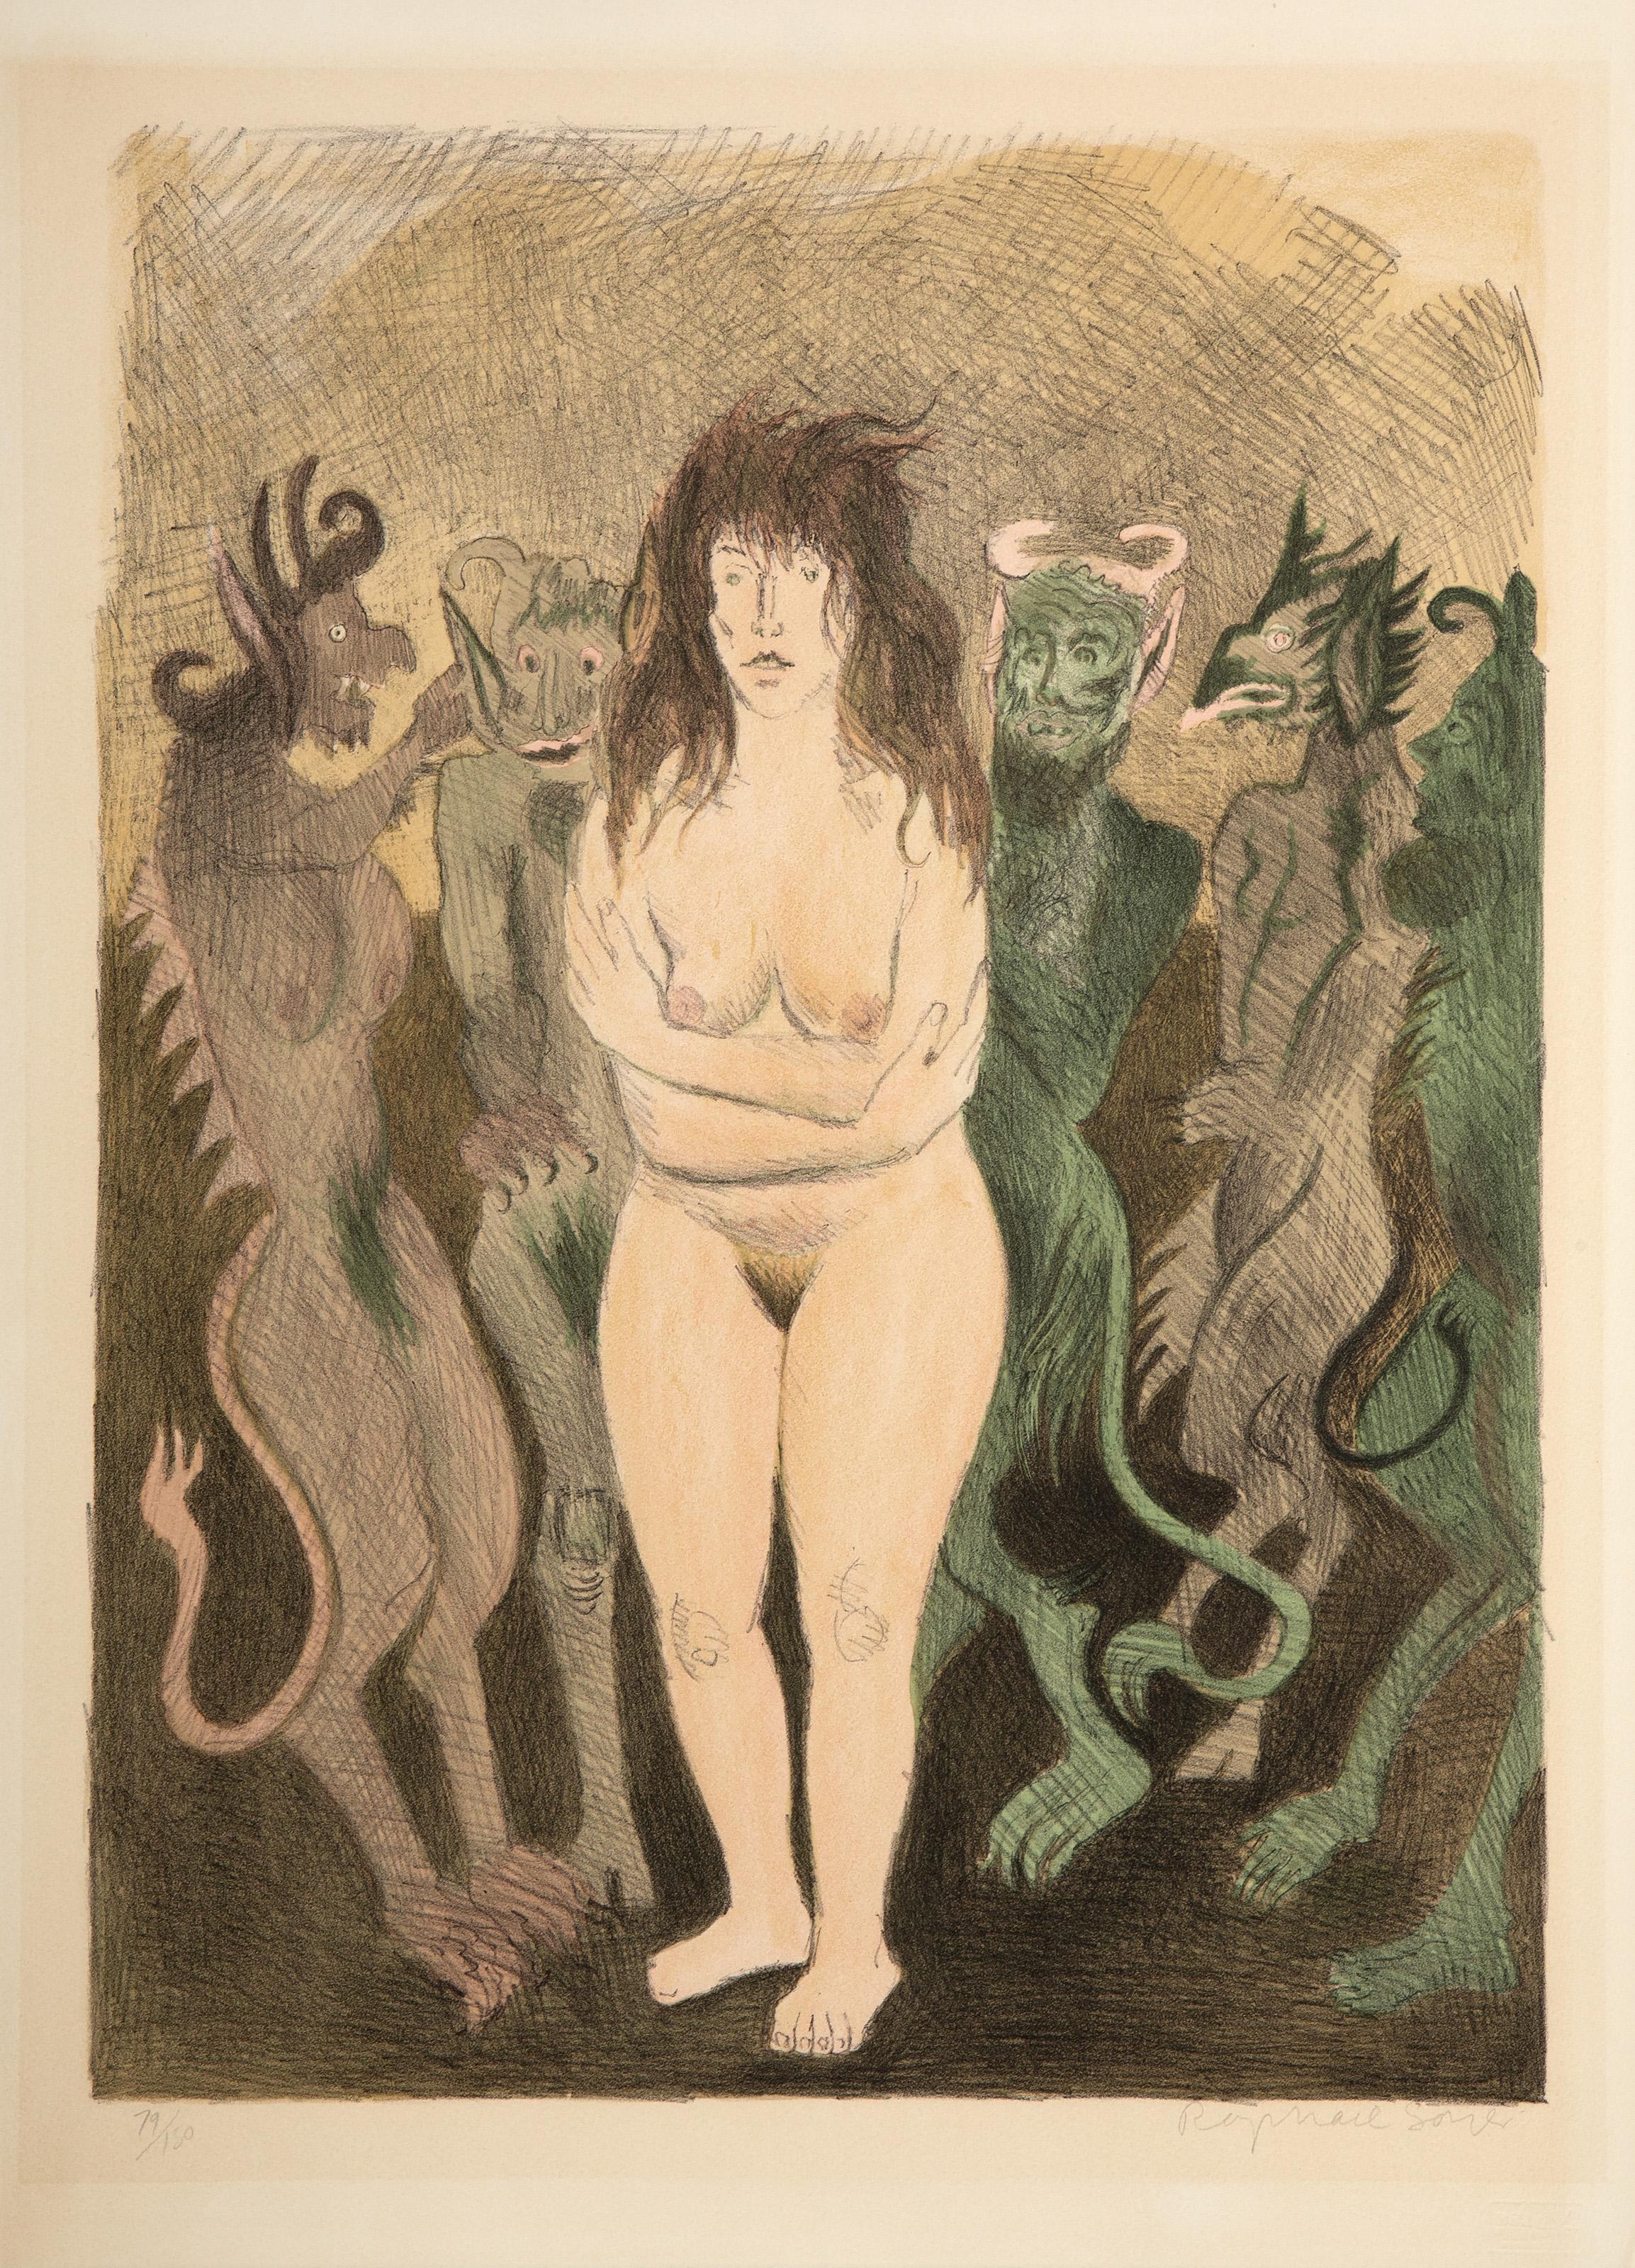 Raphael Soyer, Russian/American (1899 - 1987) -  Nude with Devils. Year: 1970, Medium: Lithograph, signed and numbered in pencil, Edition: 150, Image Size: 22 x 16.5 inches, Size: 25.75 x 19 in. (65.41 x 48.26 cm), Publisher: Touchstone Publishers,